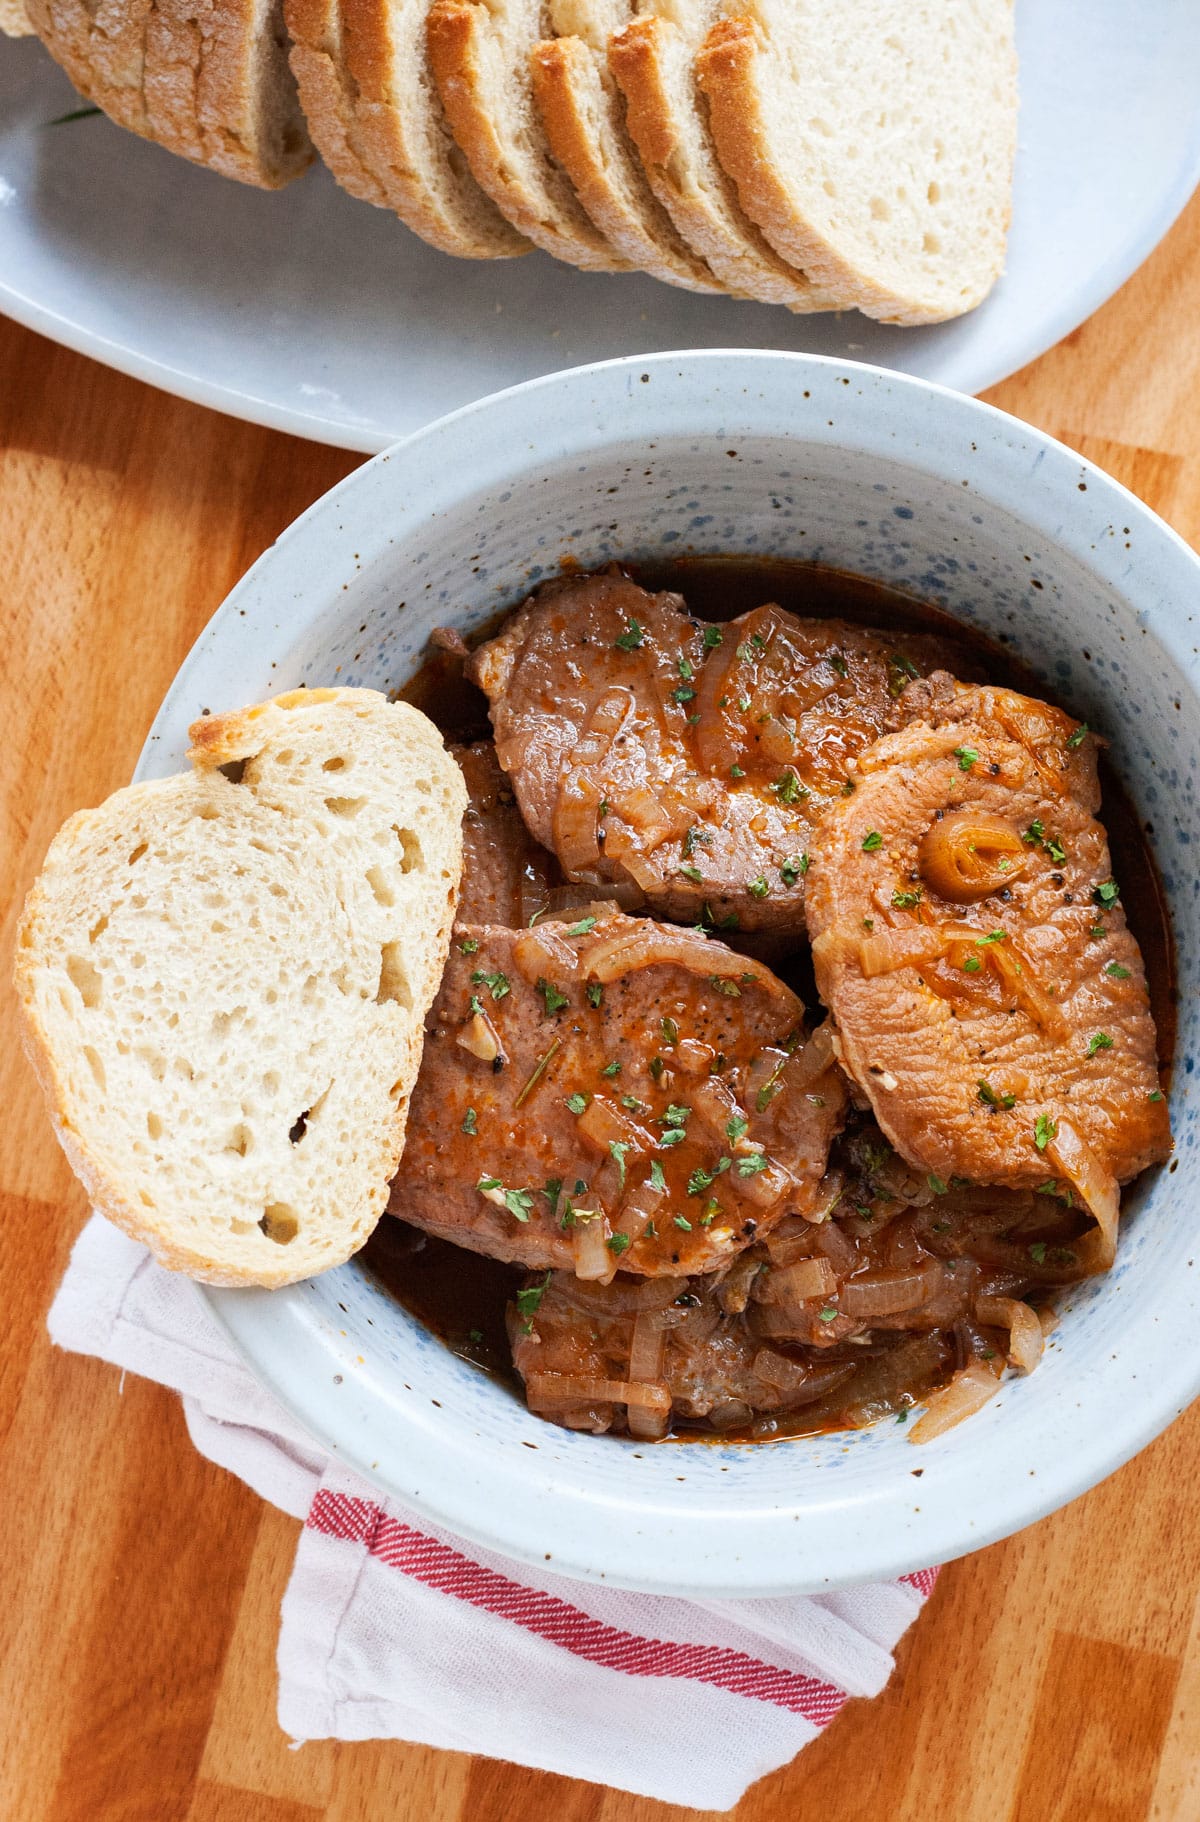 An overhead image of a gray bowl of drunken pork chops with bread on the side.